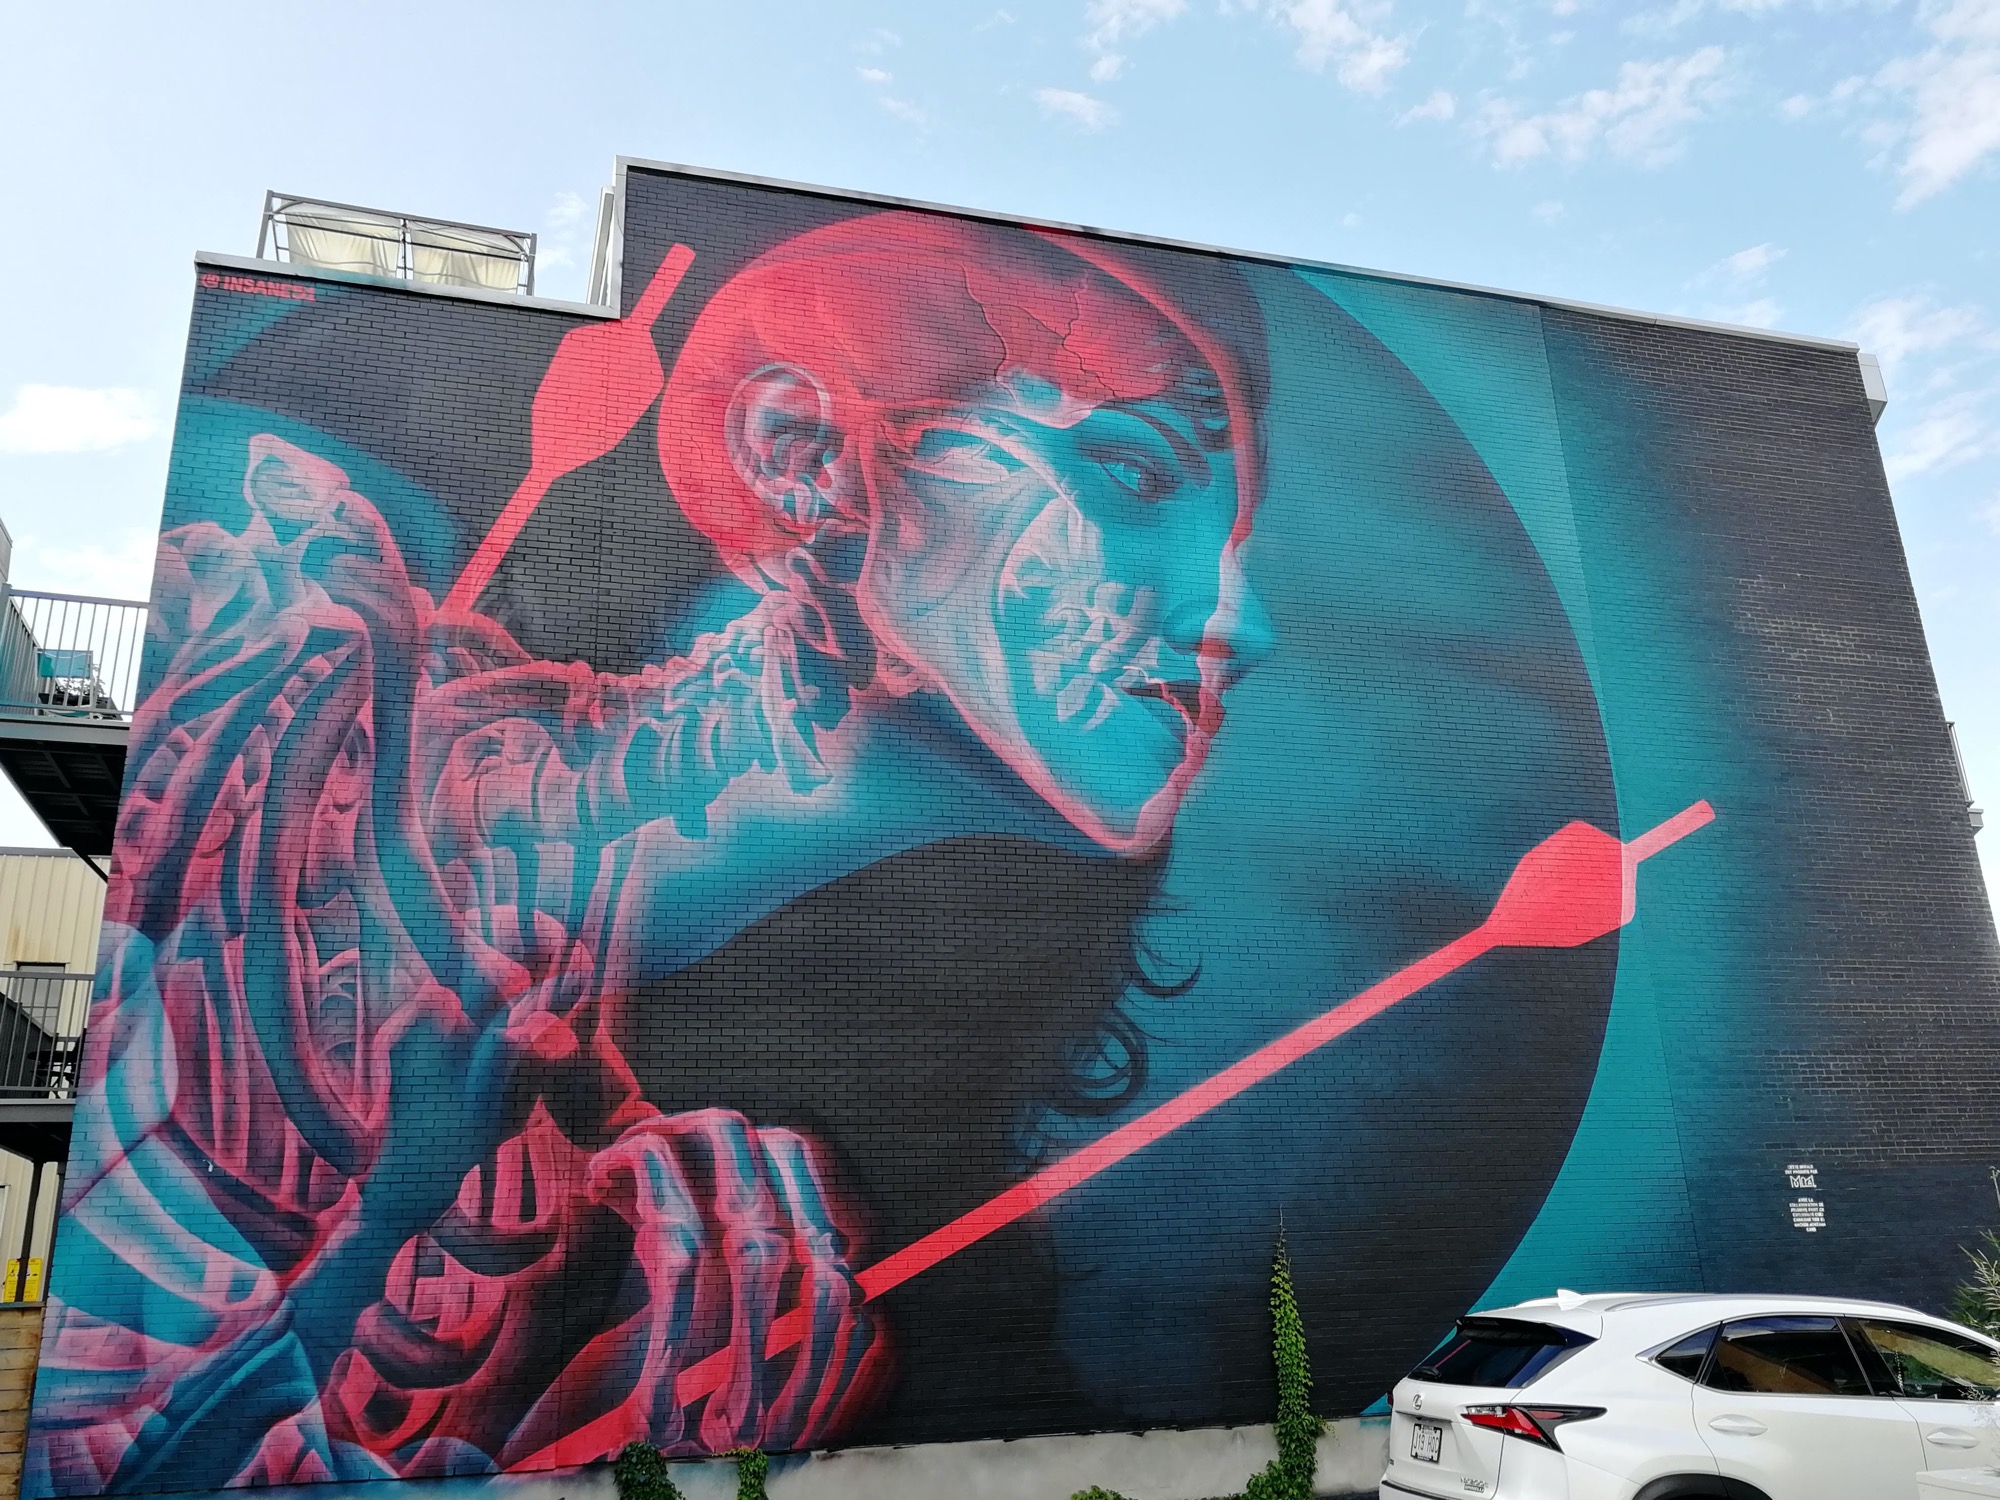 Graffiti 2904  by the artist Insane51 captured by Rabot in Montréal Canada